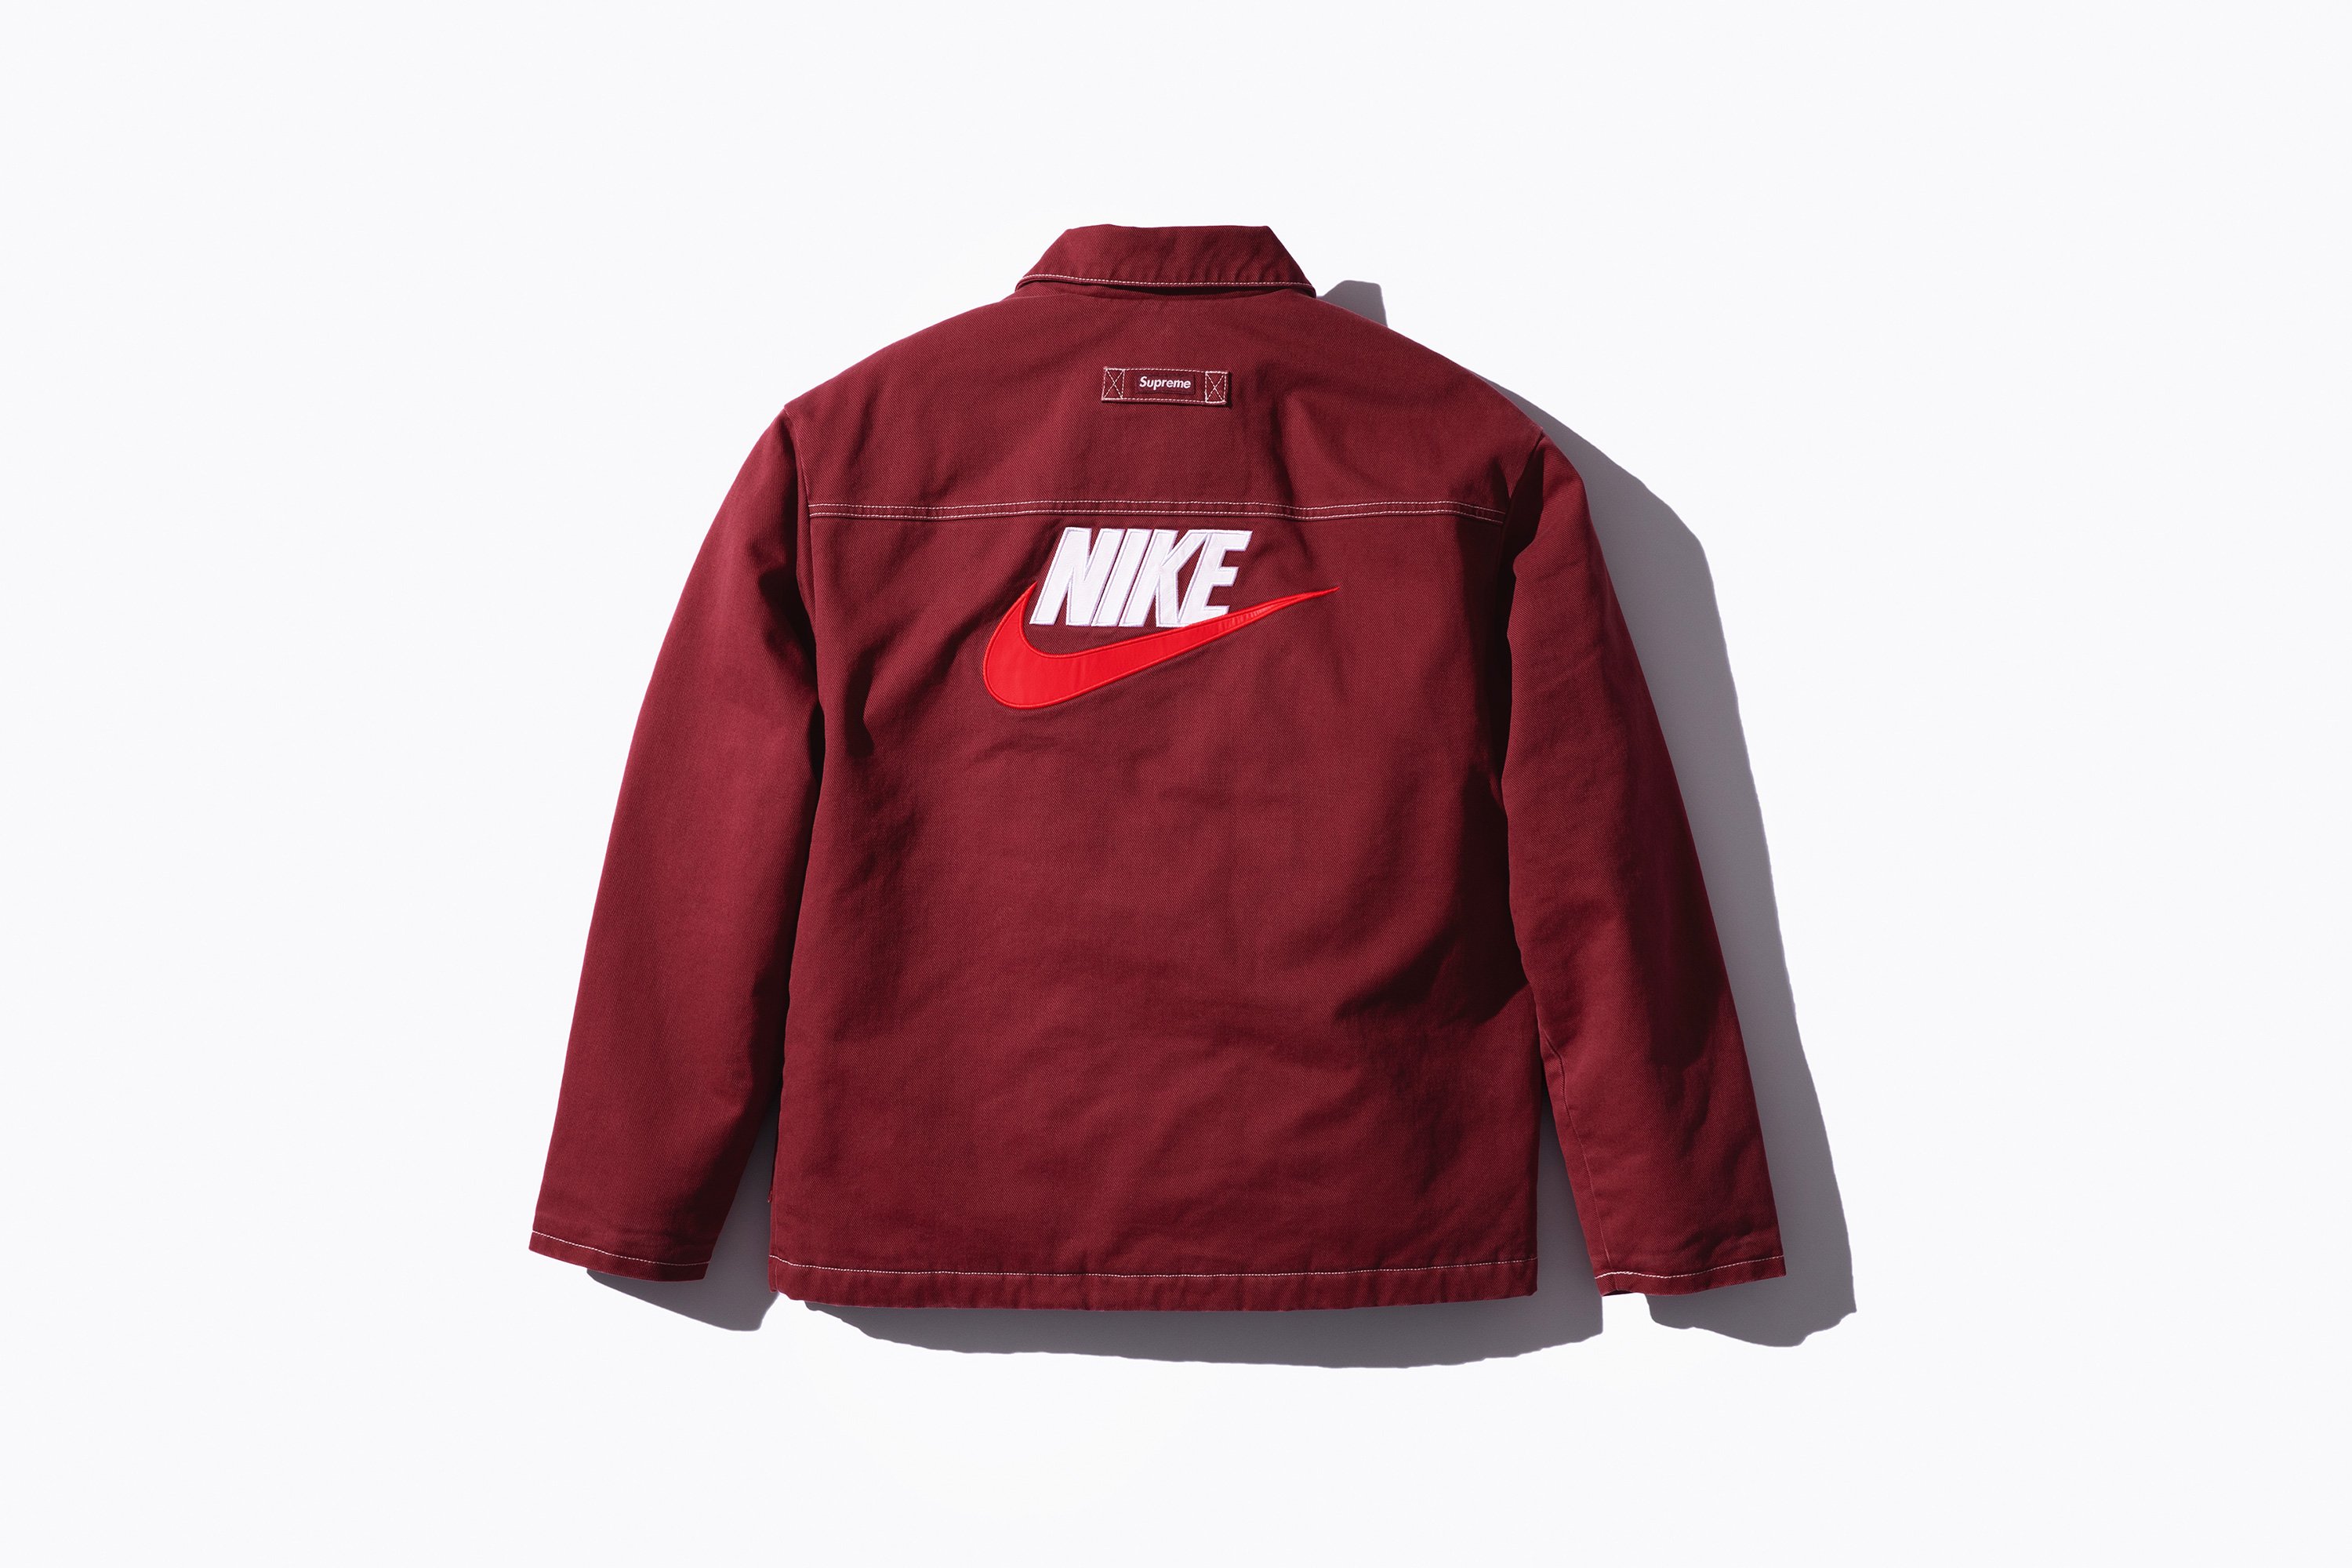 Supreme®/Nike® Double Zip Quilted Work Jacket - Supreme Community